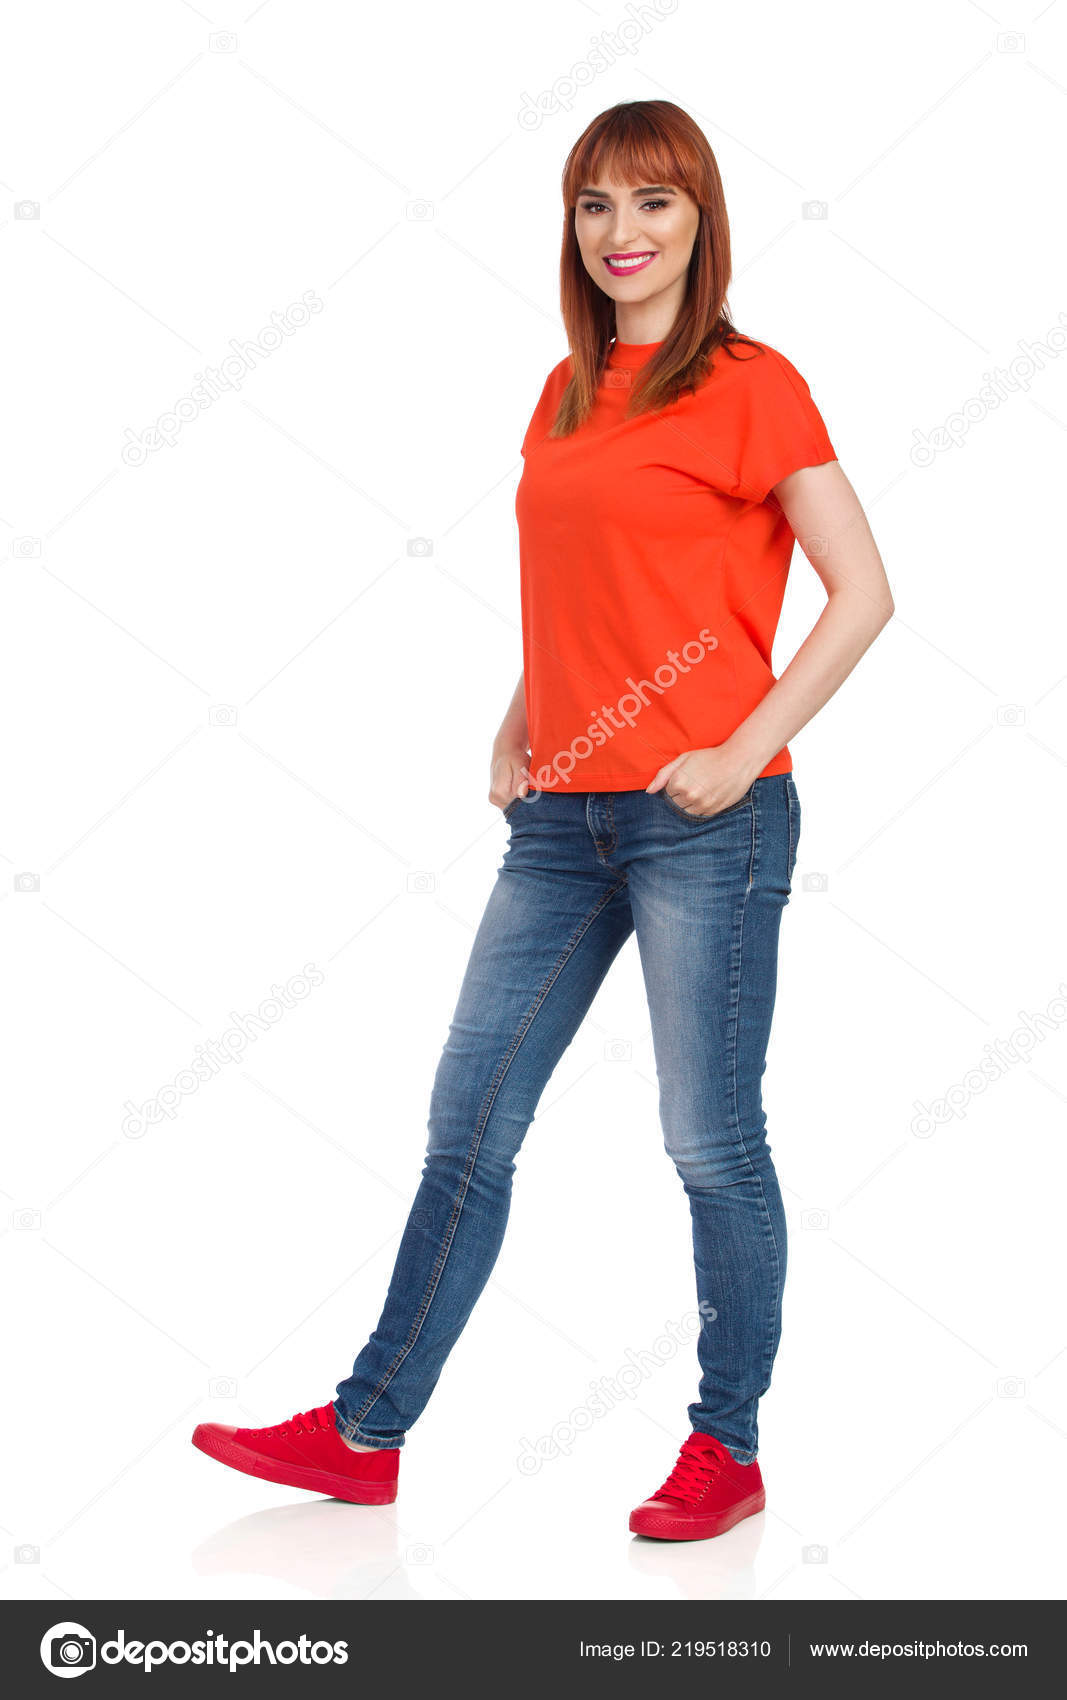 red sneakers with jeans